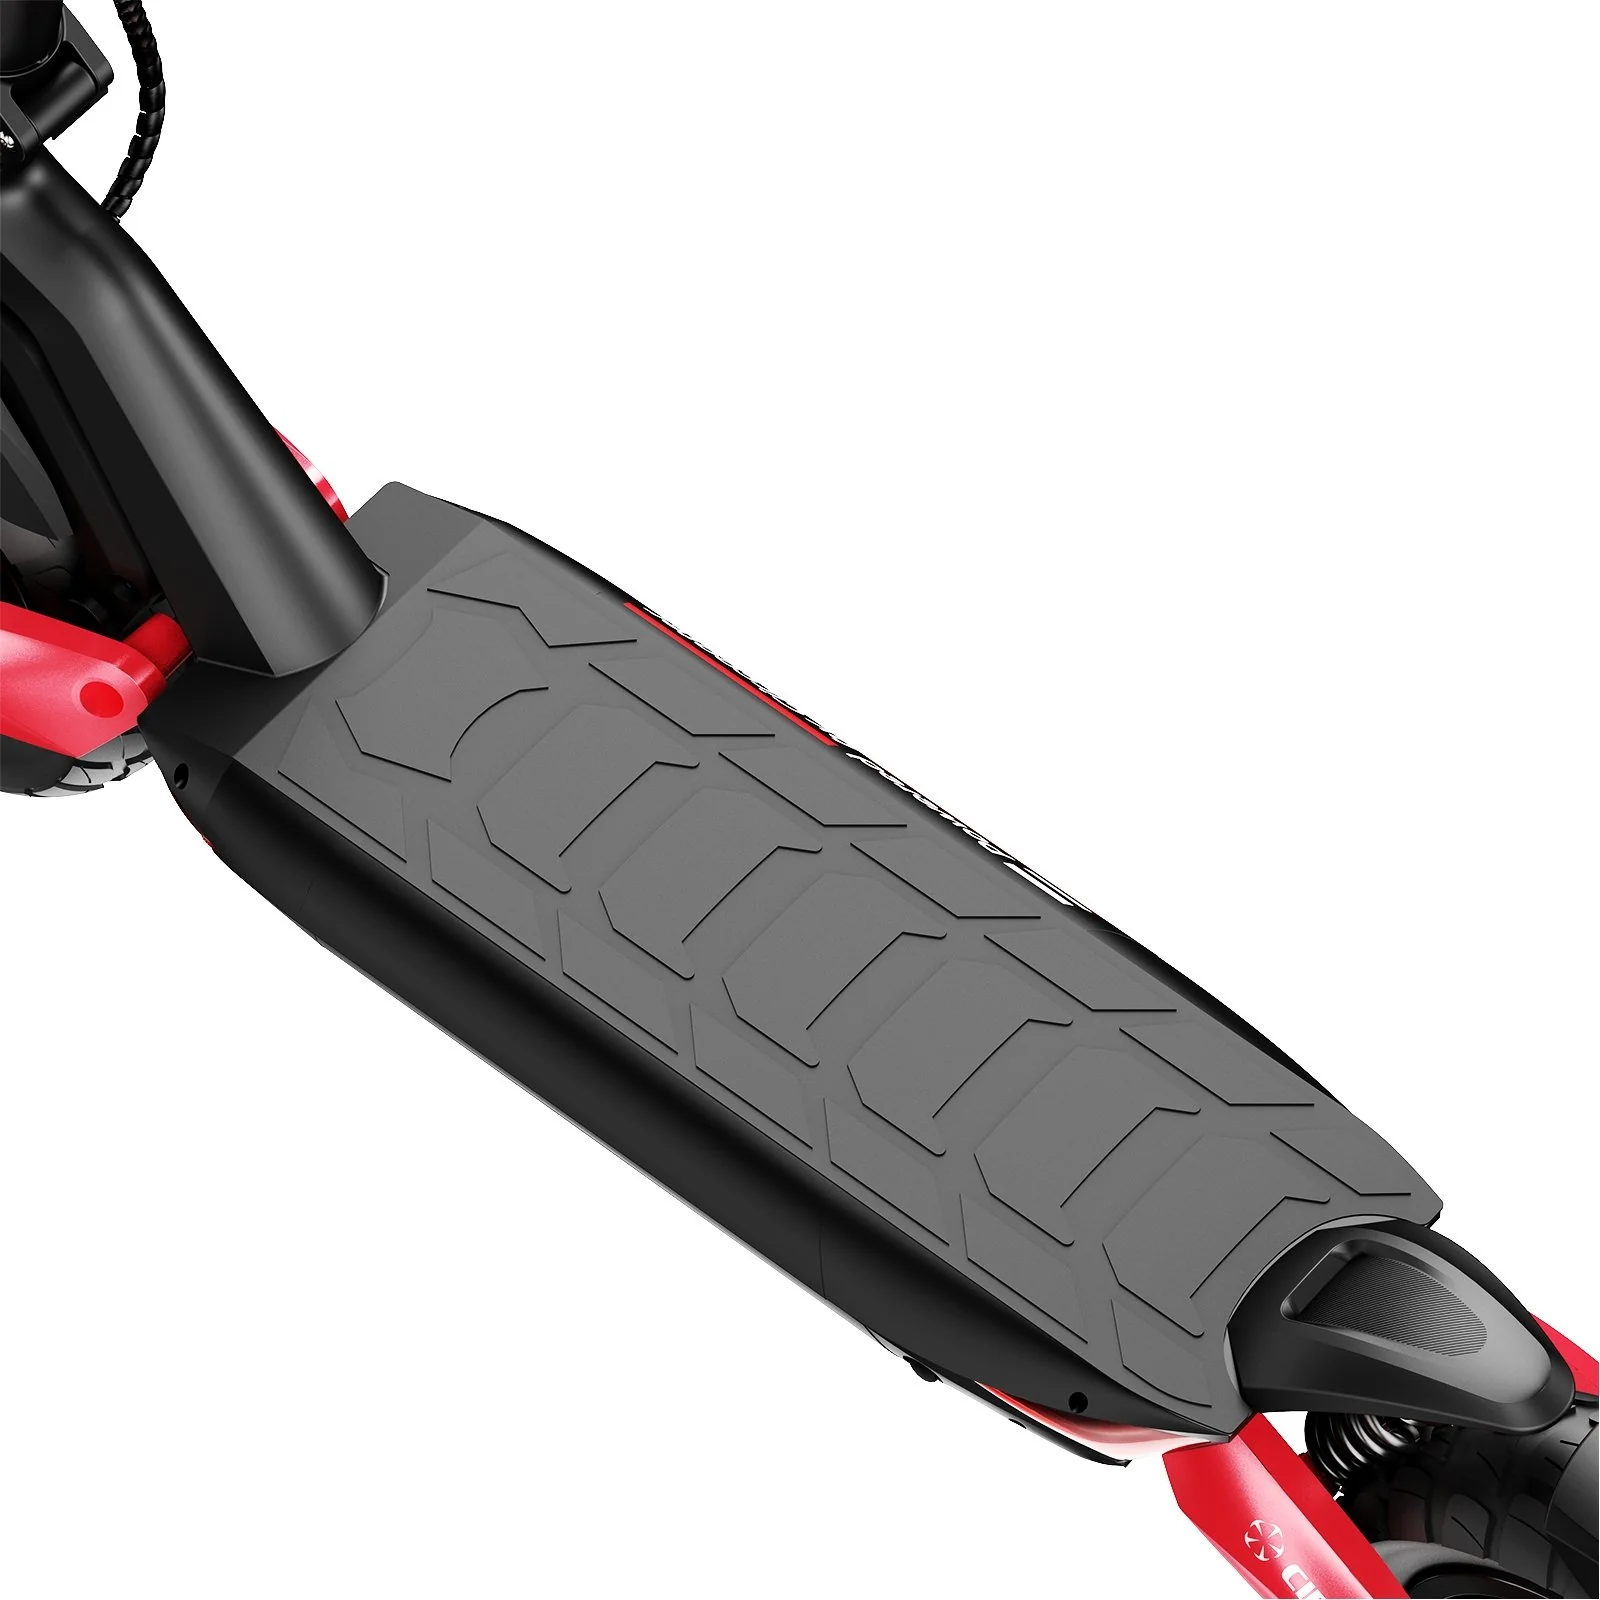 R3 Off Road Electric Scooter  800W Motor, 28 Mph